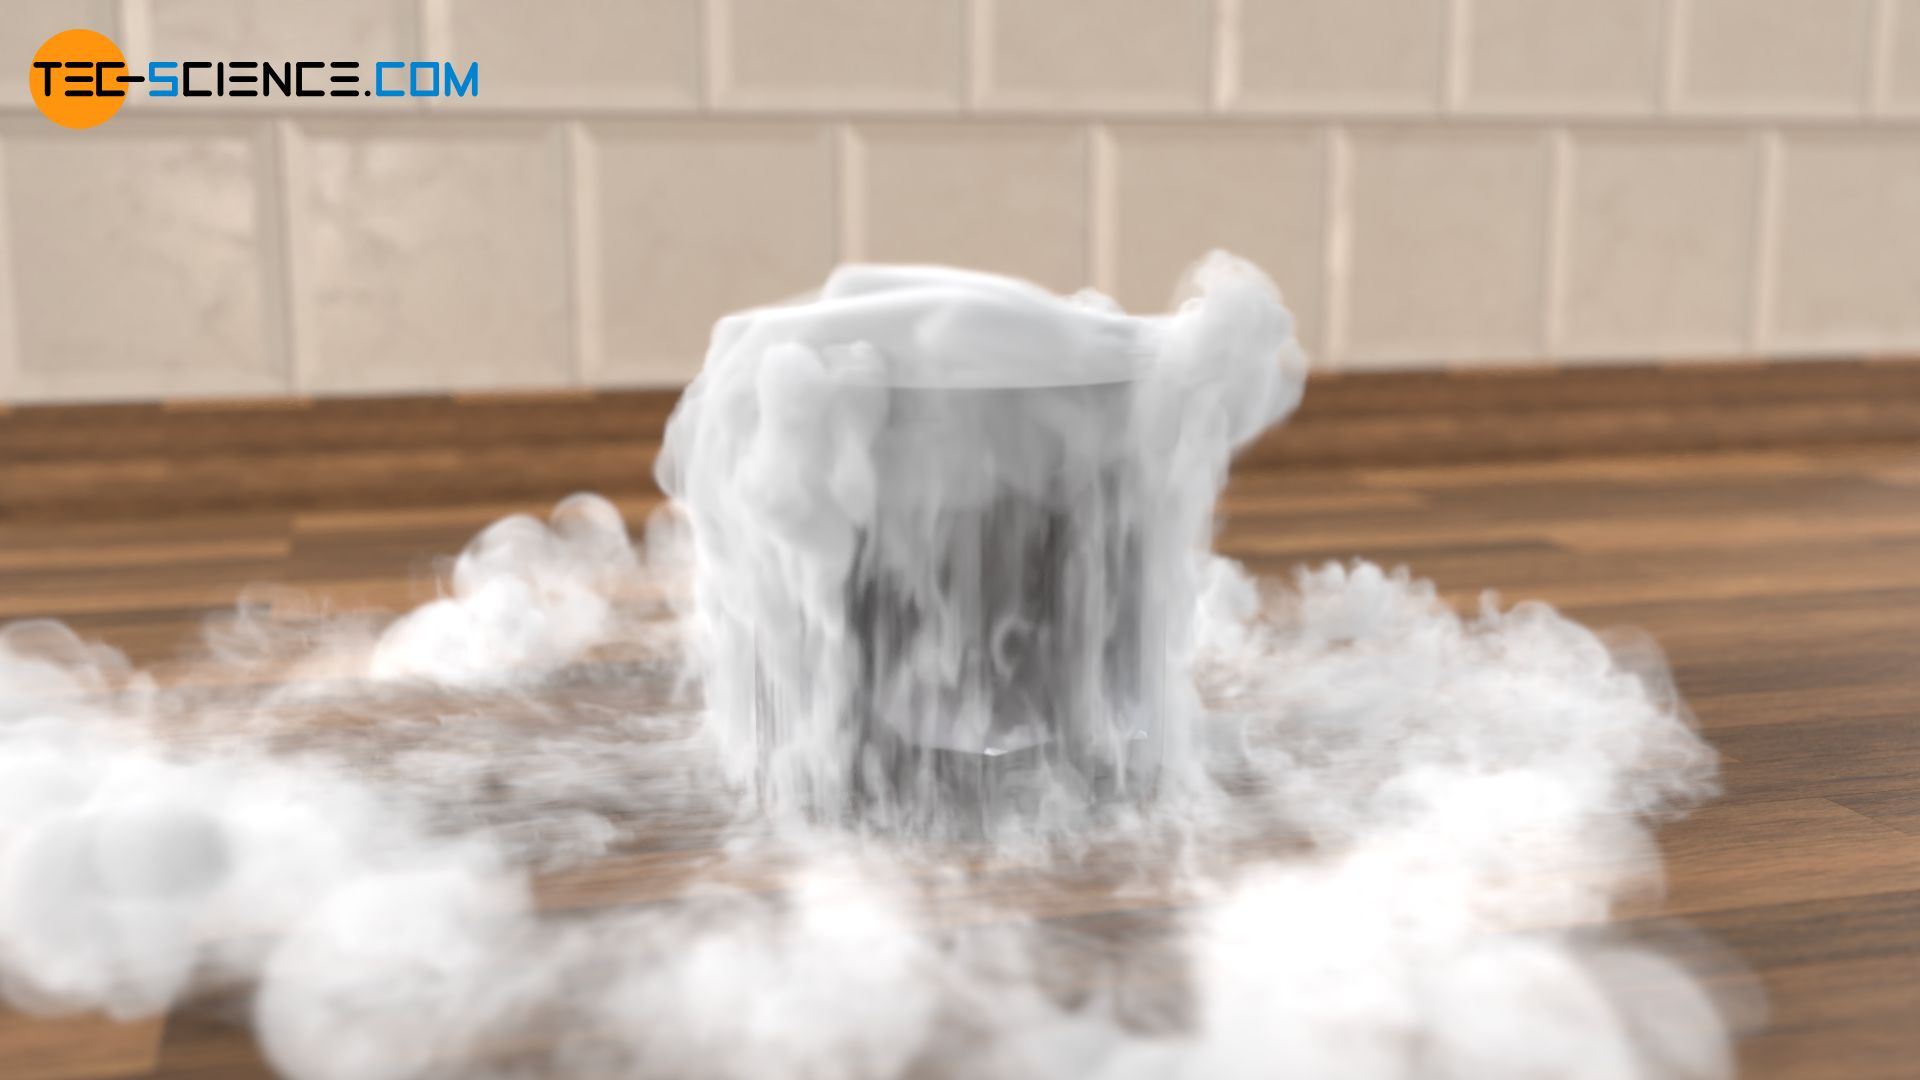 Illustration of the sublimation of dry ice (carbon dioxide CO2)